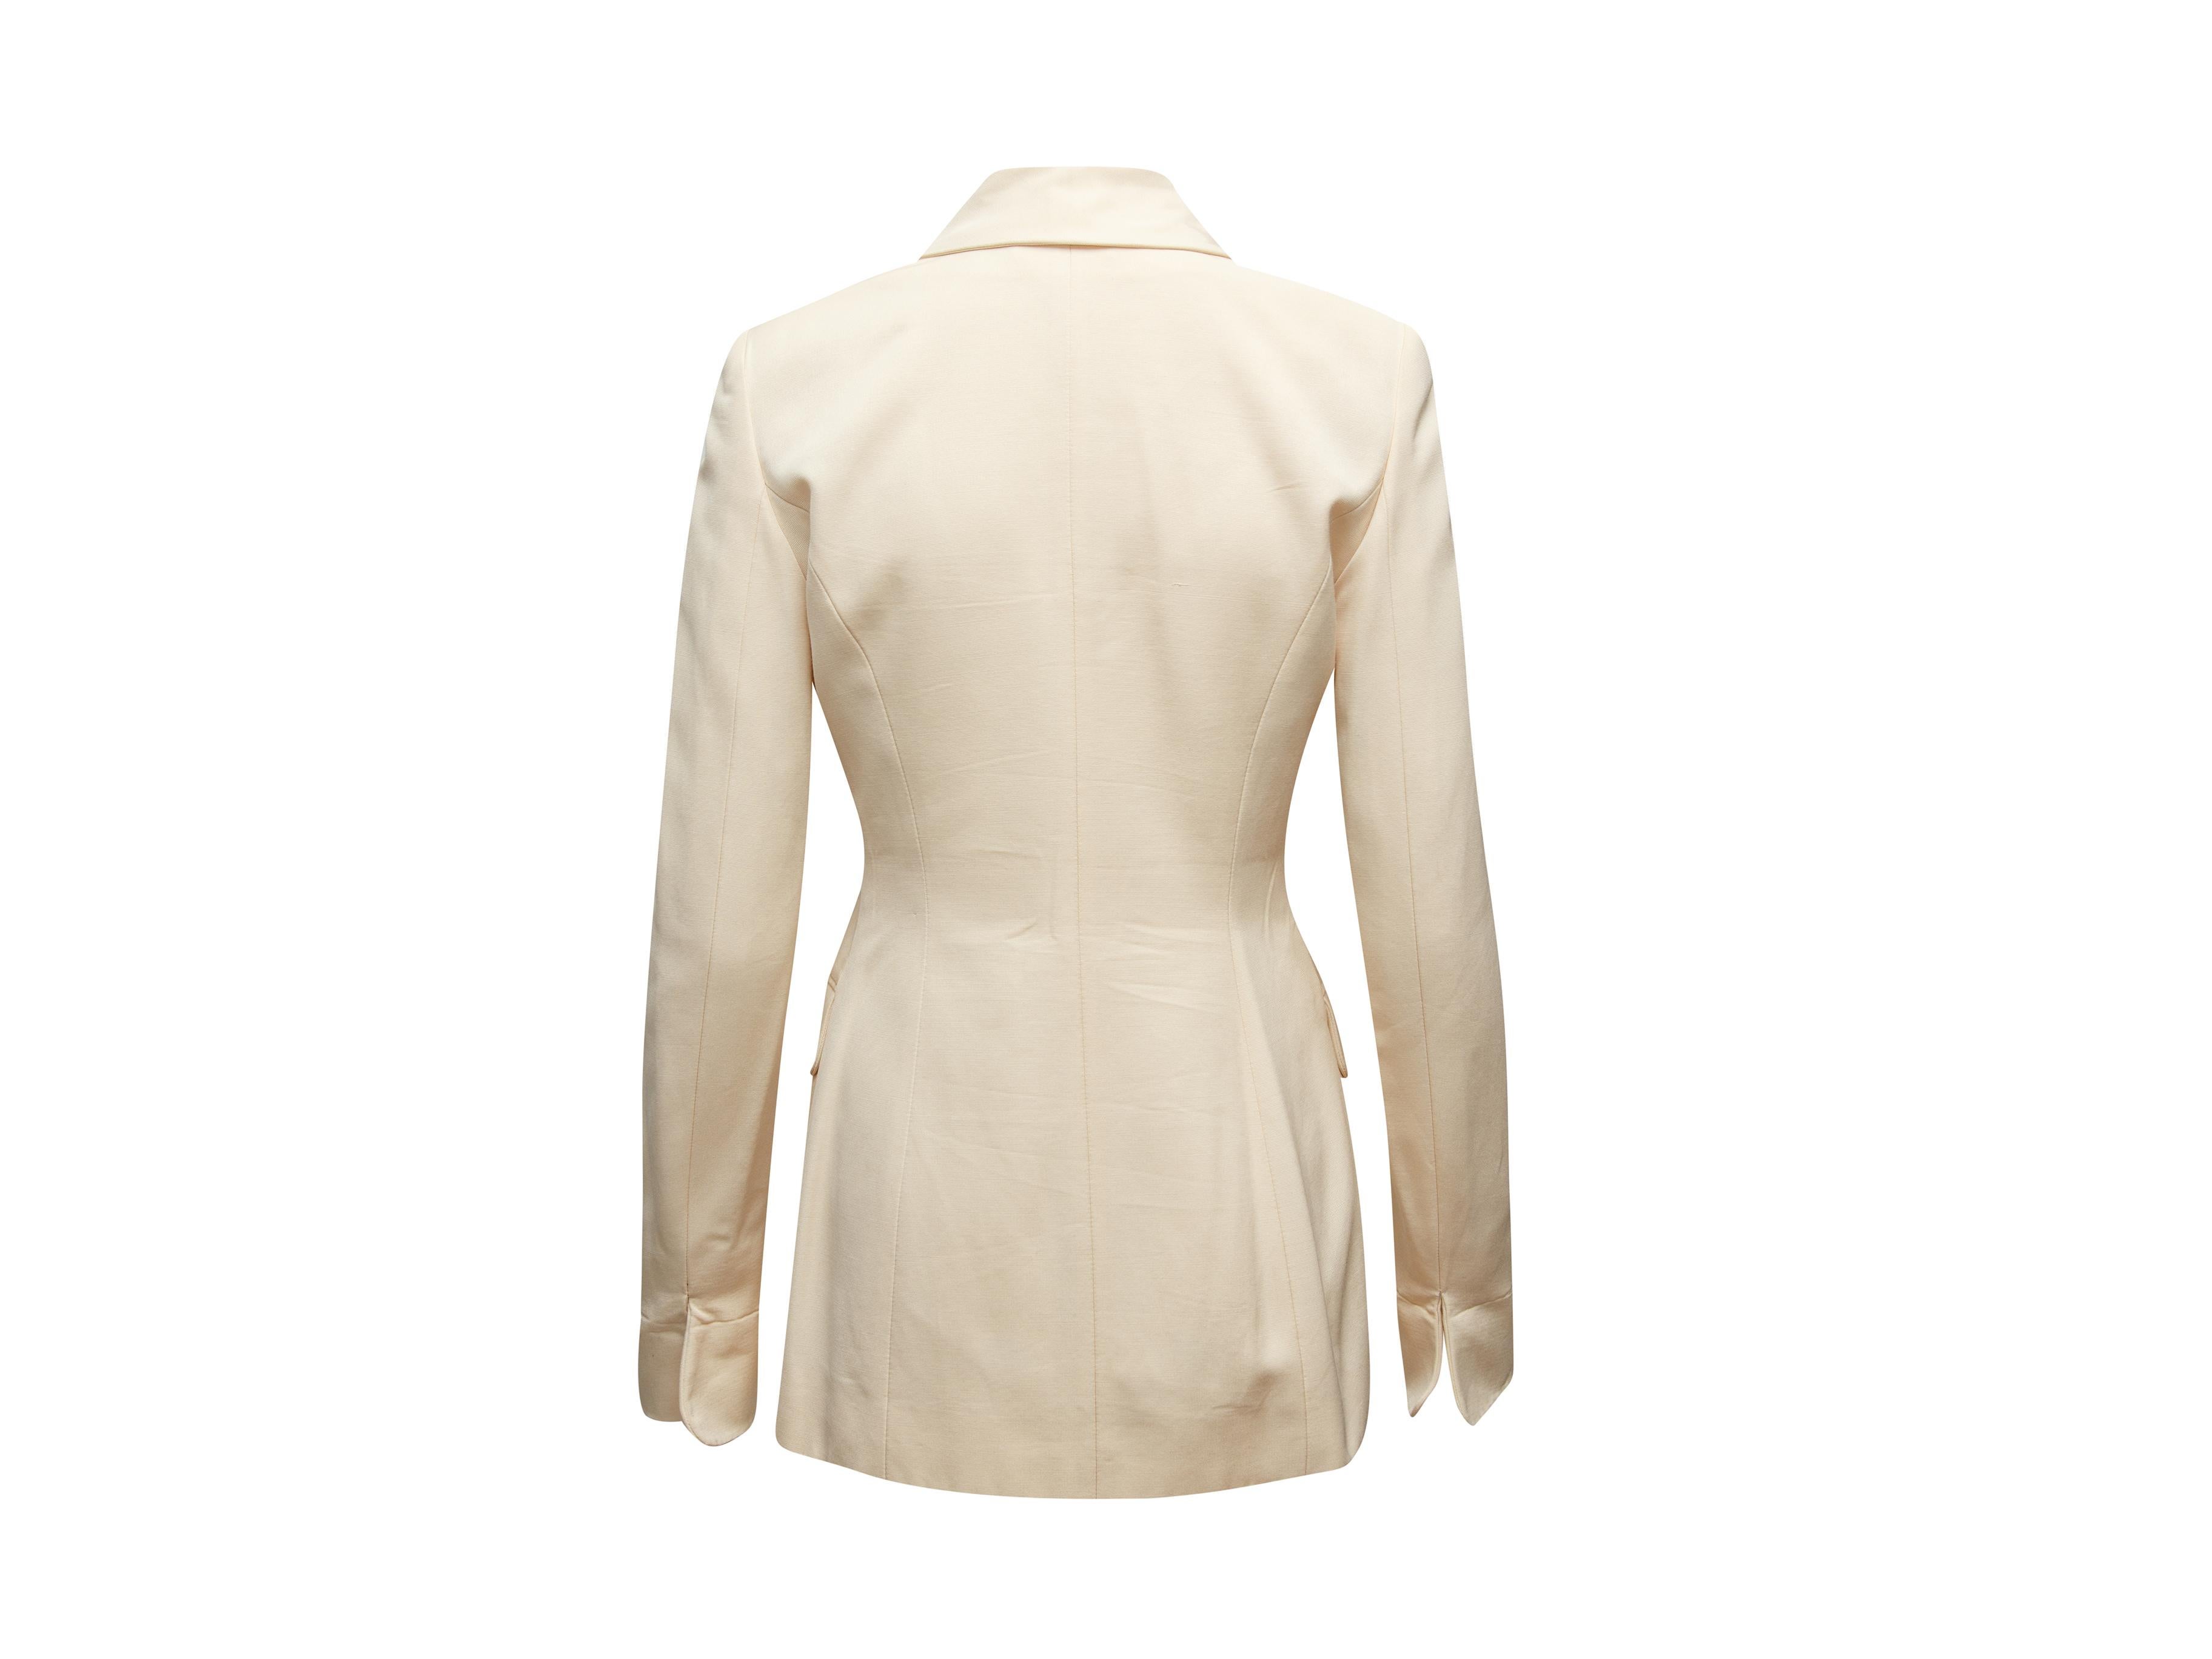 Product details: Vintage cream skirt suit by Givenchy. Pointed collar. Dual flap pockets. Button closures at front. Designer size 38. Blazer- 30